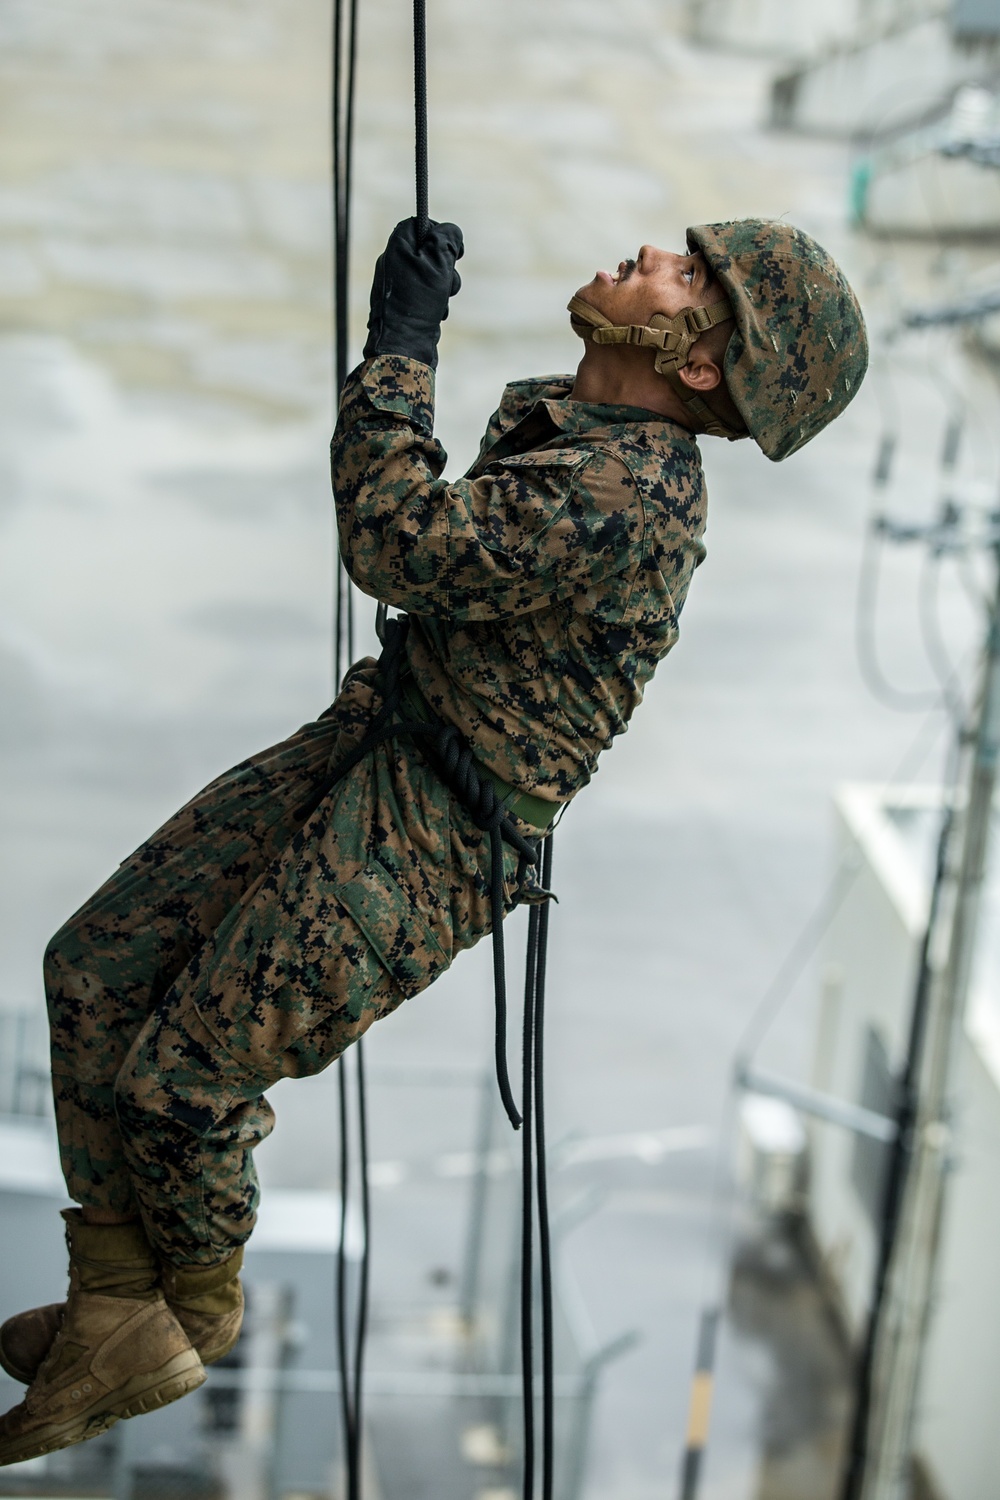 DVIDS - Images - Okinawa service members learn how to rappel and fast rope  [Image 9 of 12]